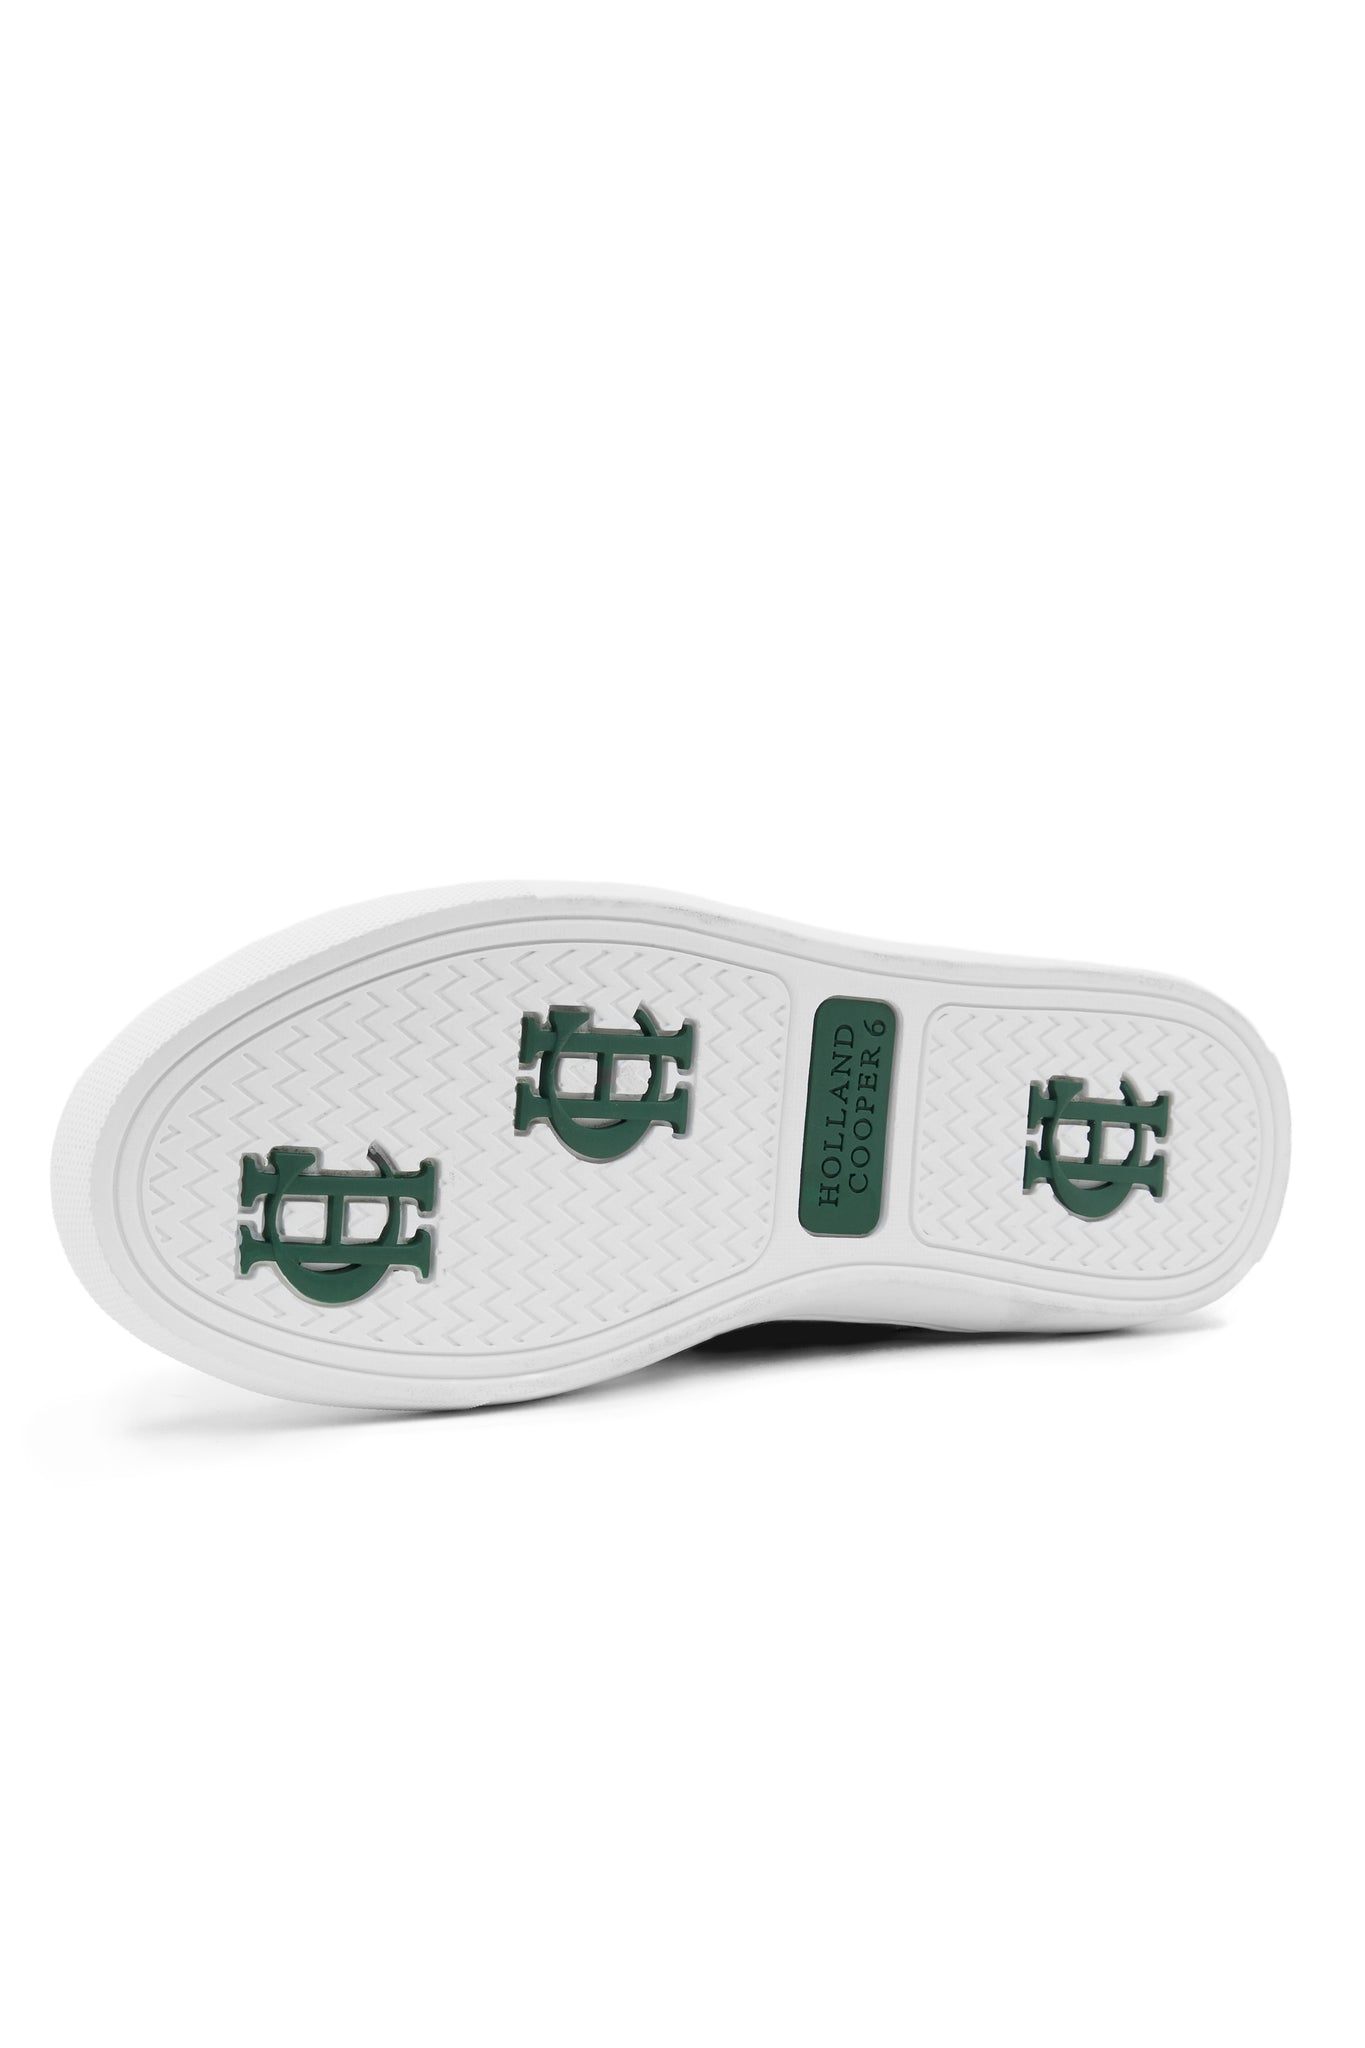 White leather sole of trainer with dark green branding